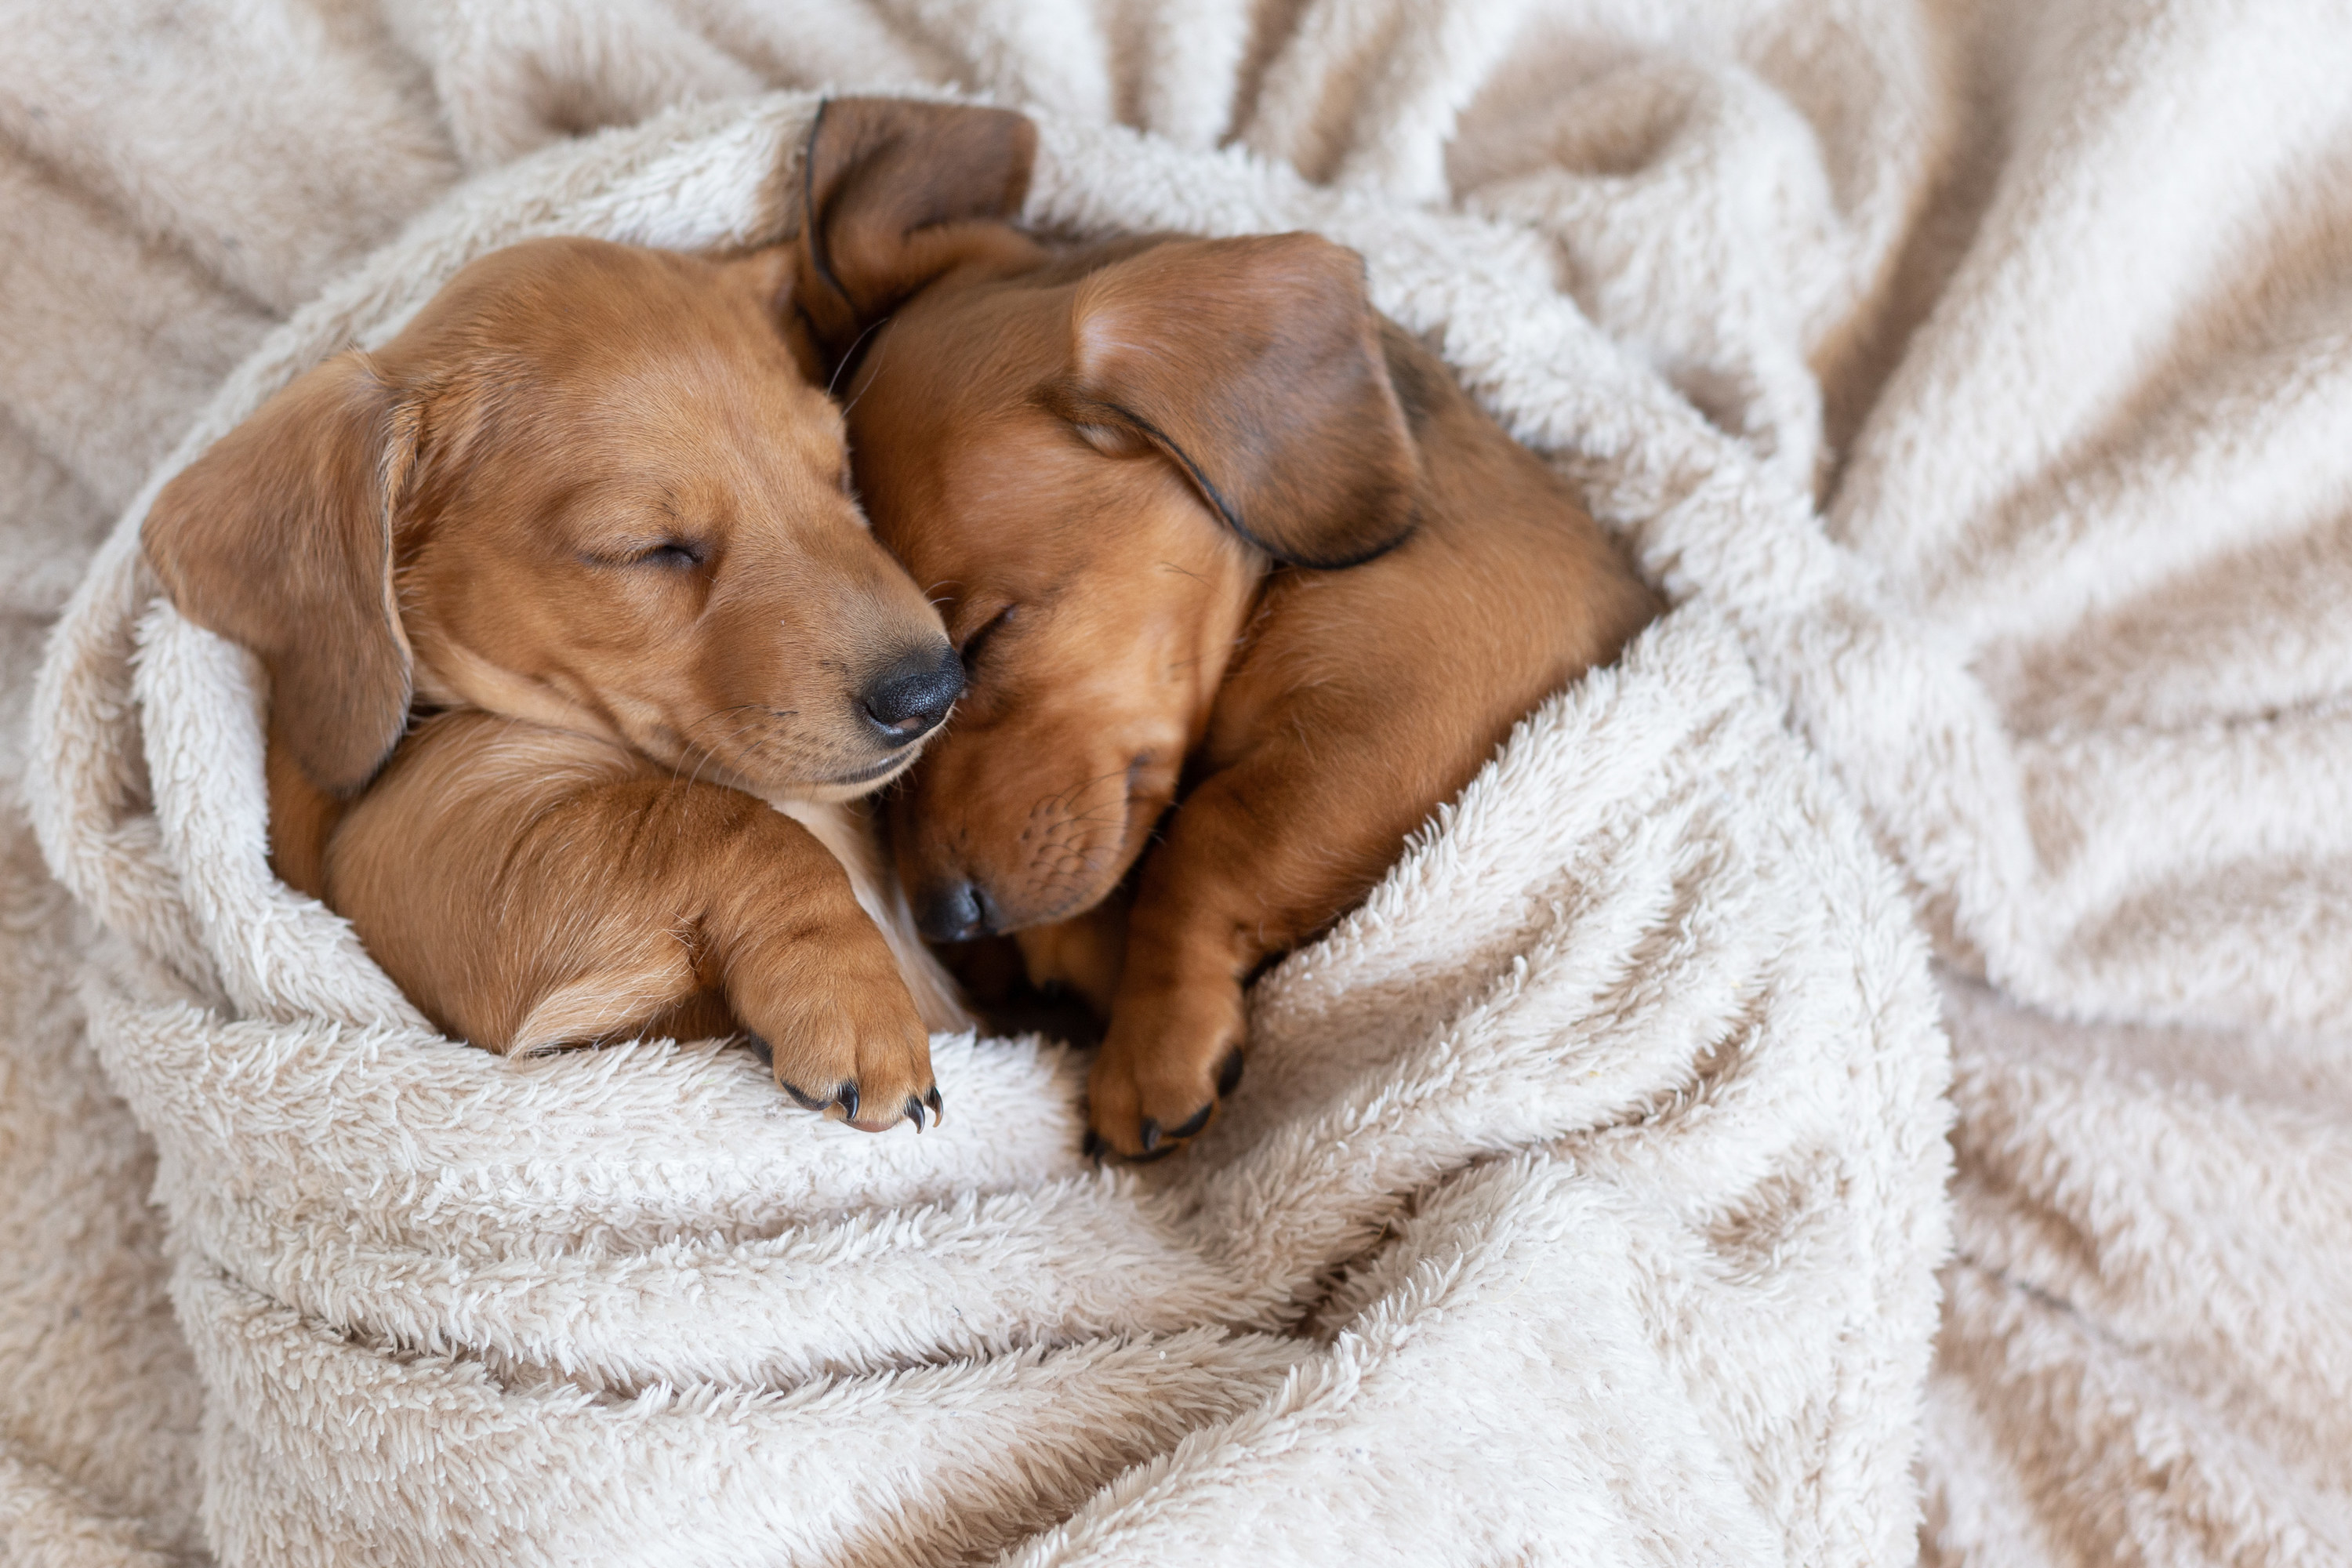 Cute dachshund puppies sleep cuddled up to each other.